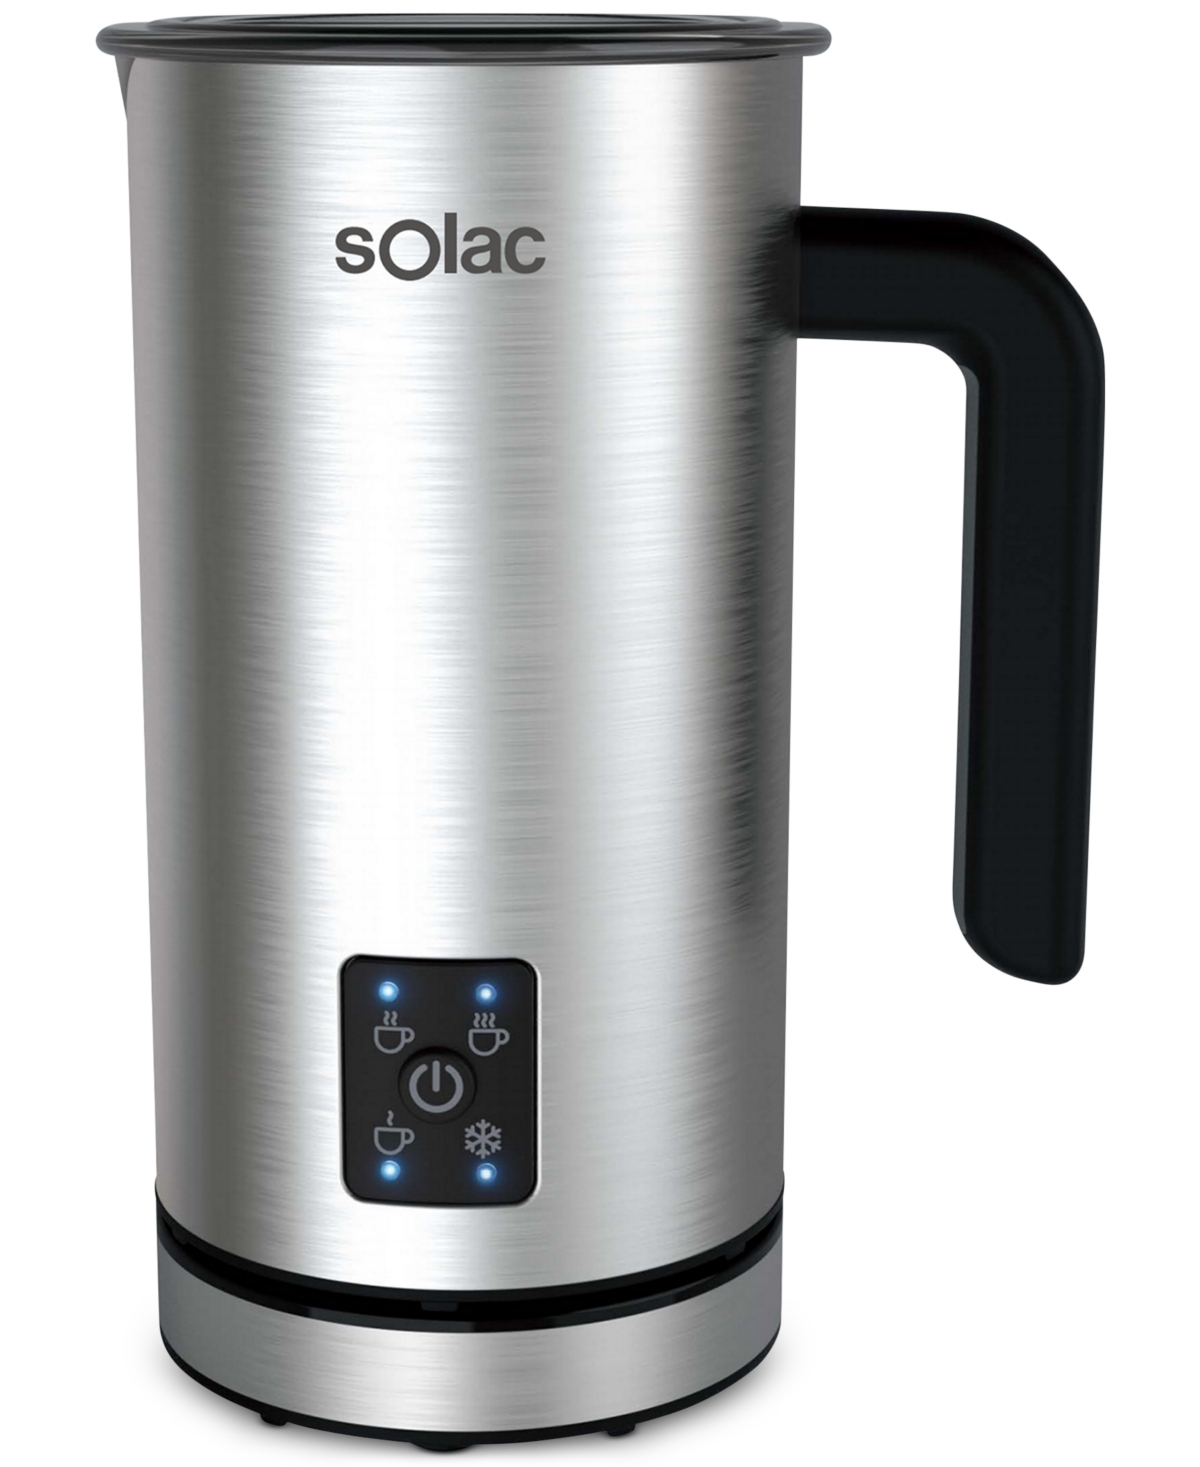 Solac Pro Foam Stainless Steel Milk Frother & Hot Chocolate Mixer In Brushed Stainless-steel